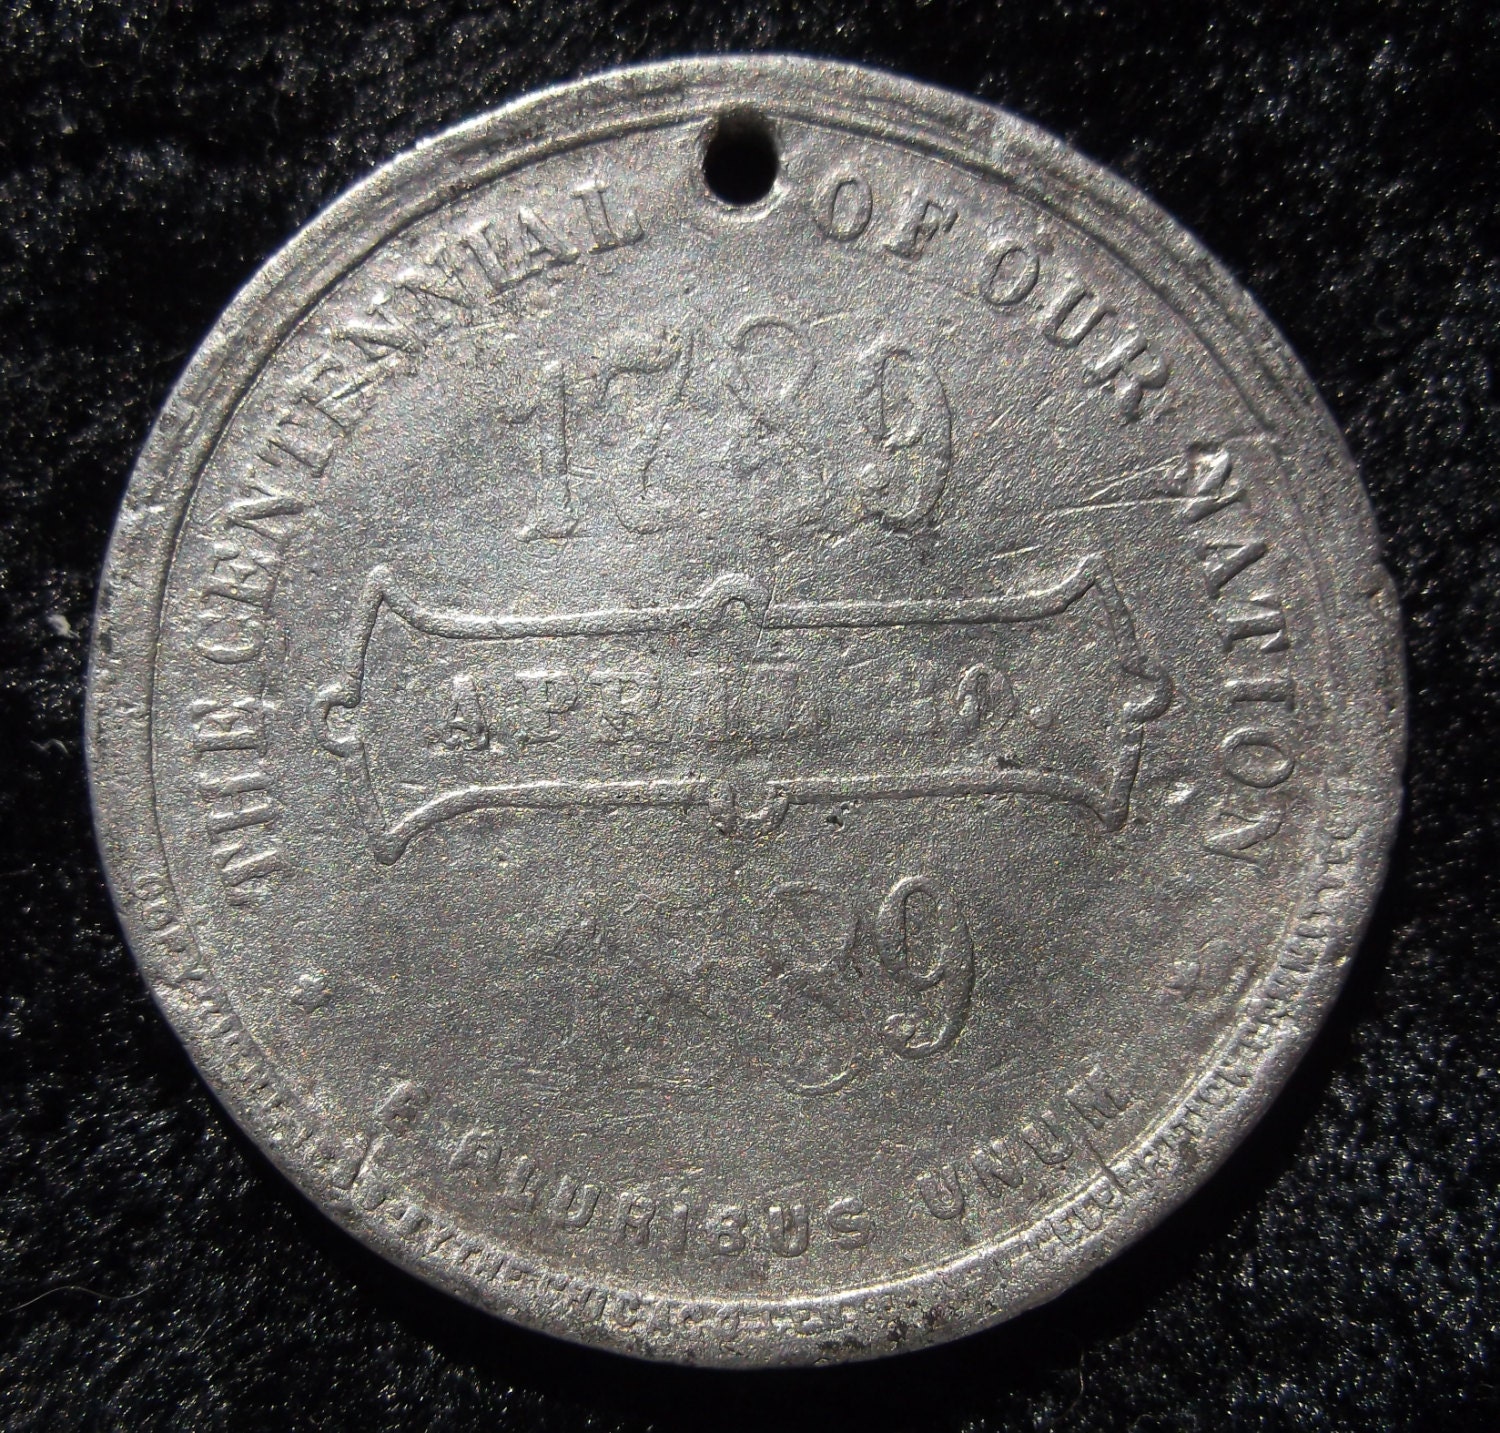 George Washington Medal, RARE, Centennial of Our Nation, 1789 to 1889 ...